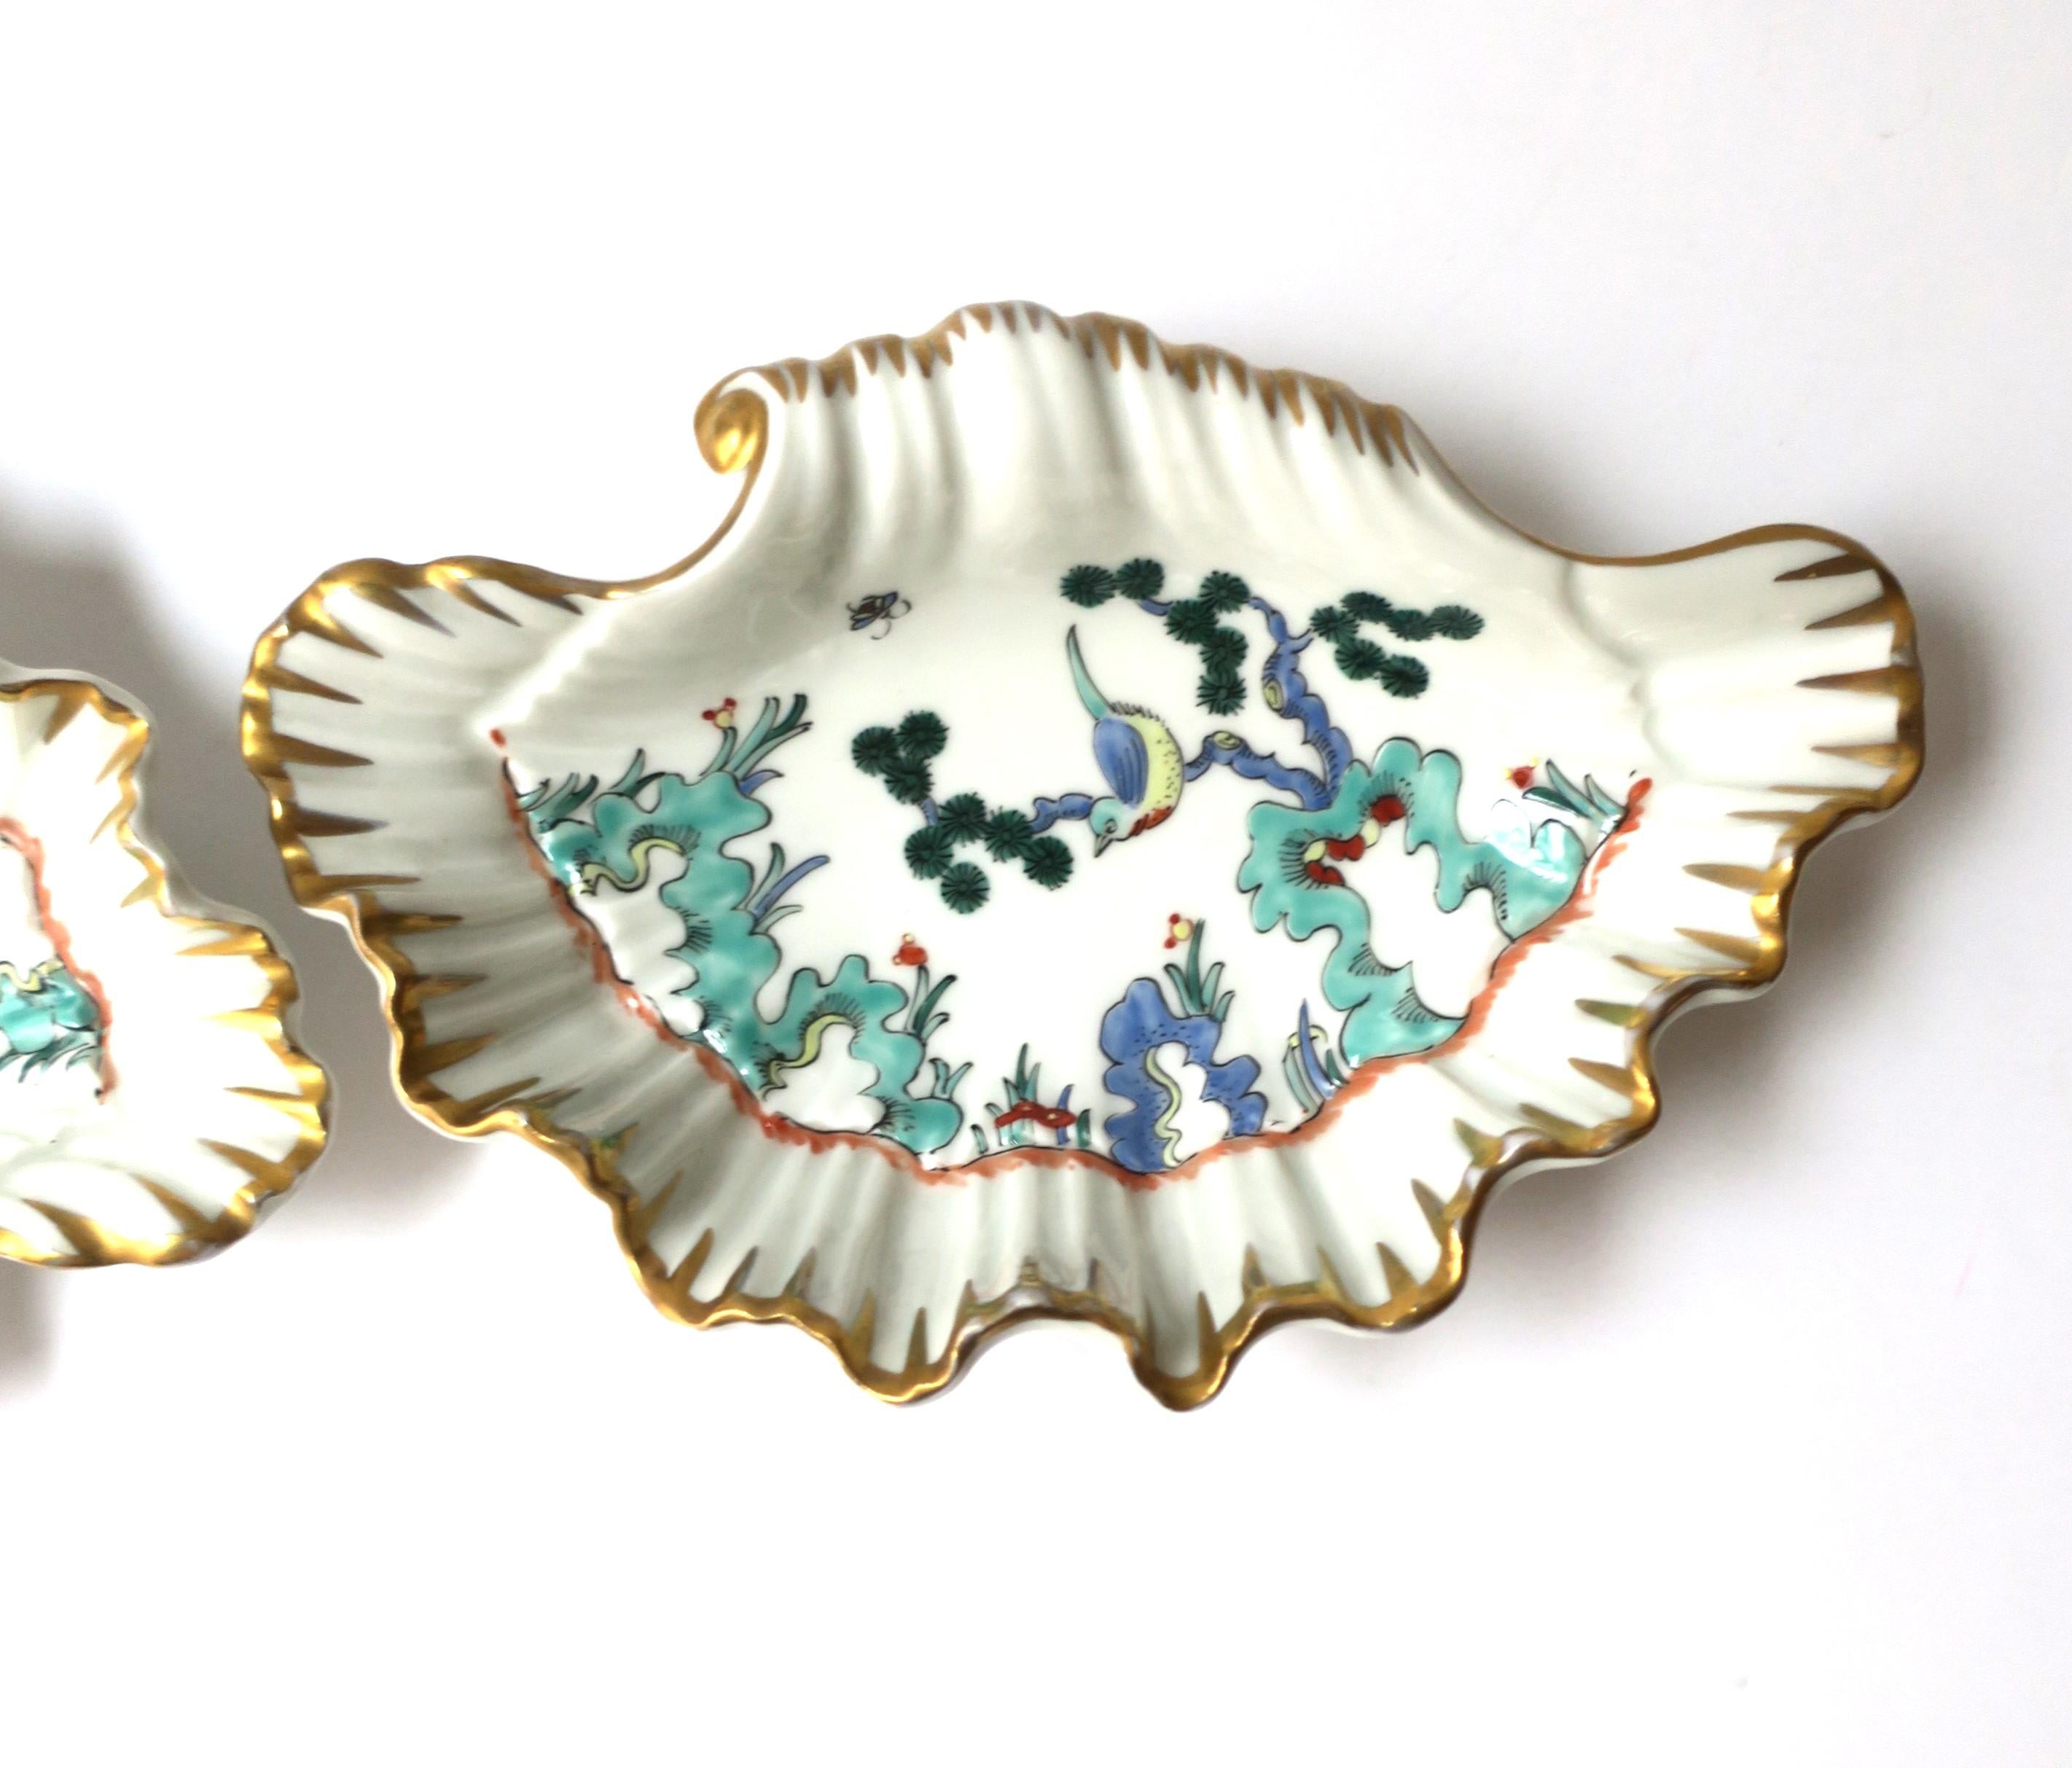 French Porcelain Seashell Bowls with Bird Design, Pair In Good Condition For Sale In New York, NY